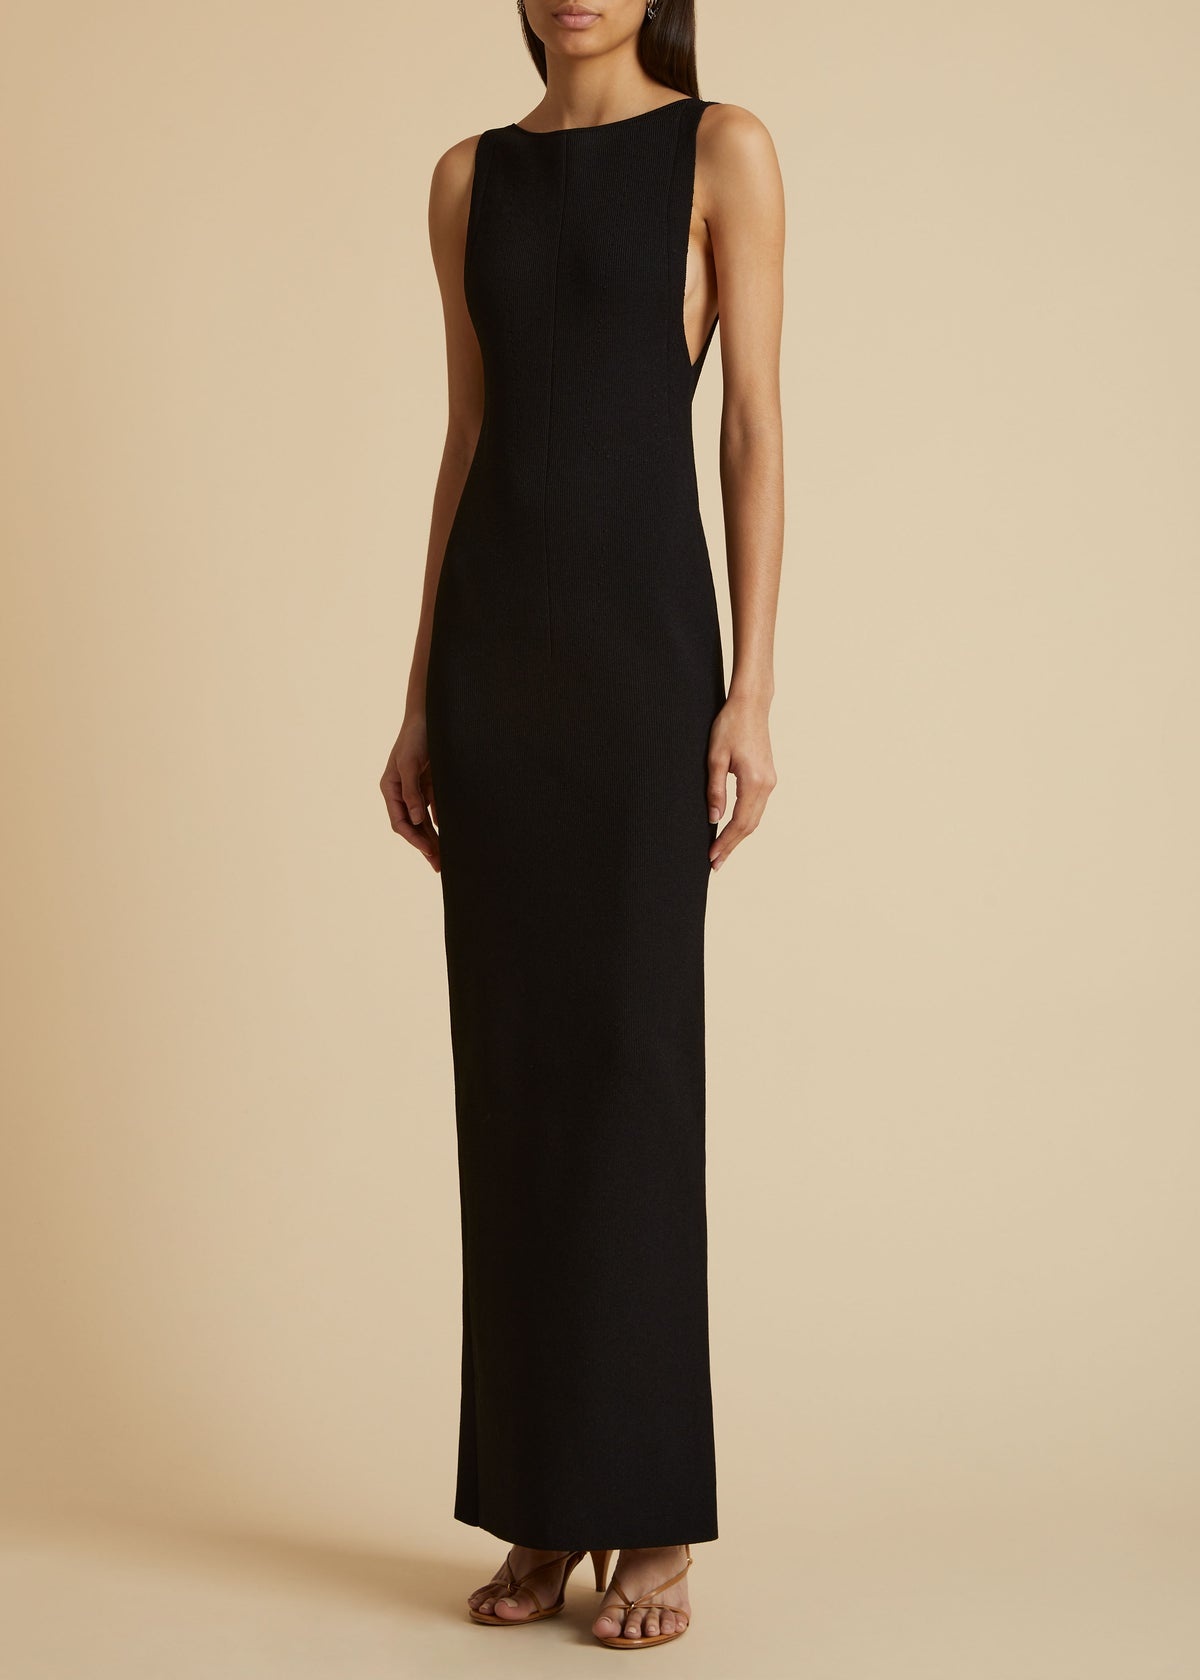 The Evelyn Dress in Black - 1